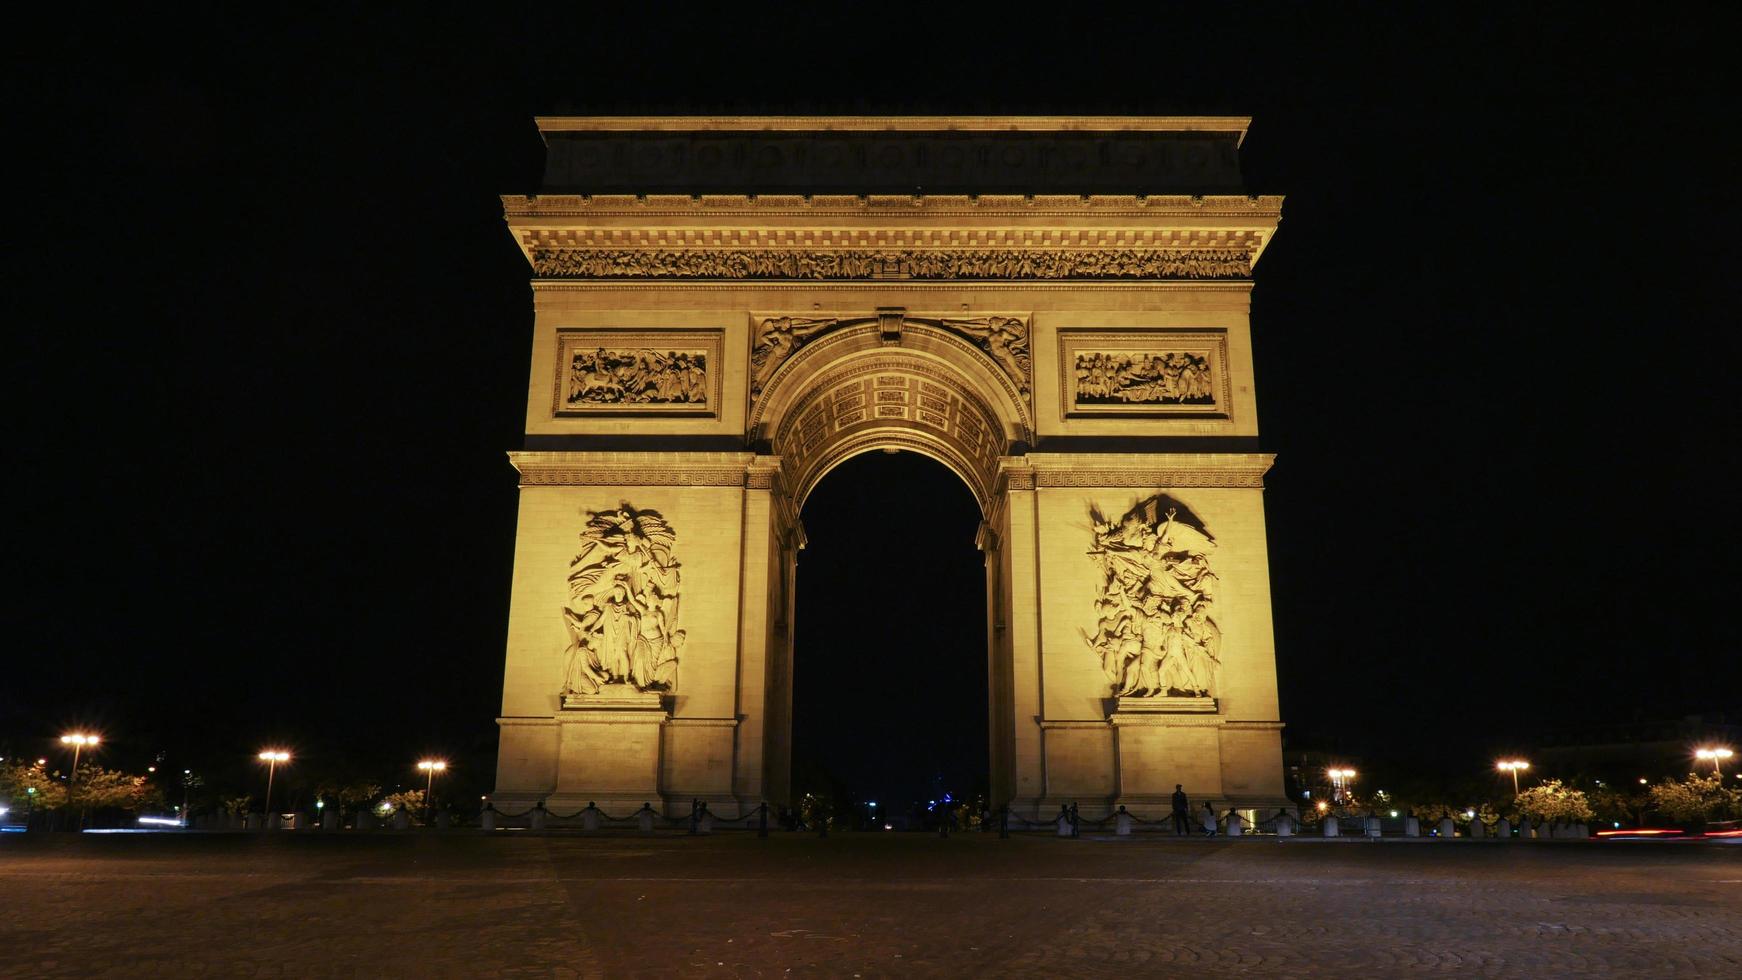 Paris, France, 2020 - Champs-Elysees arch at night photo